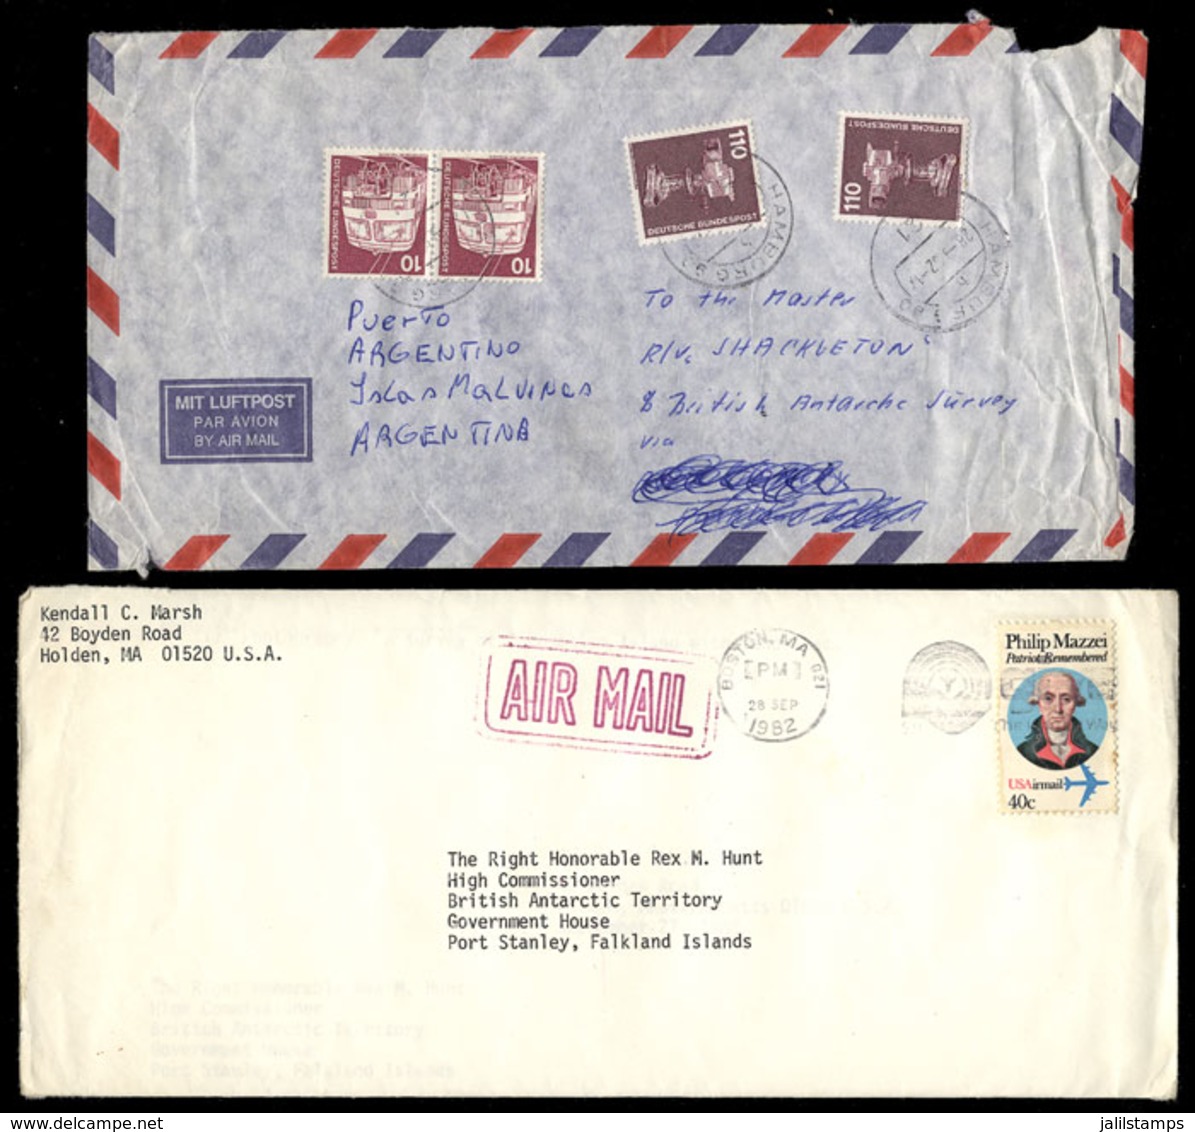 FALKLAND ISLANDS/MALVINAS: 8 Covers Sent From Different Countries To The Falkland Islands, Dispatched Soon After The End - Falkland Islands